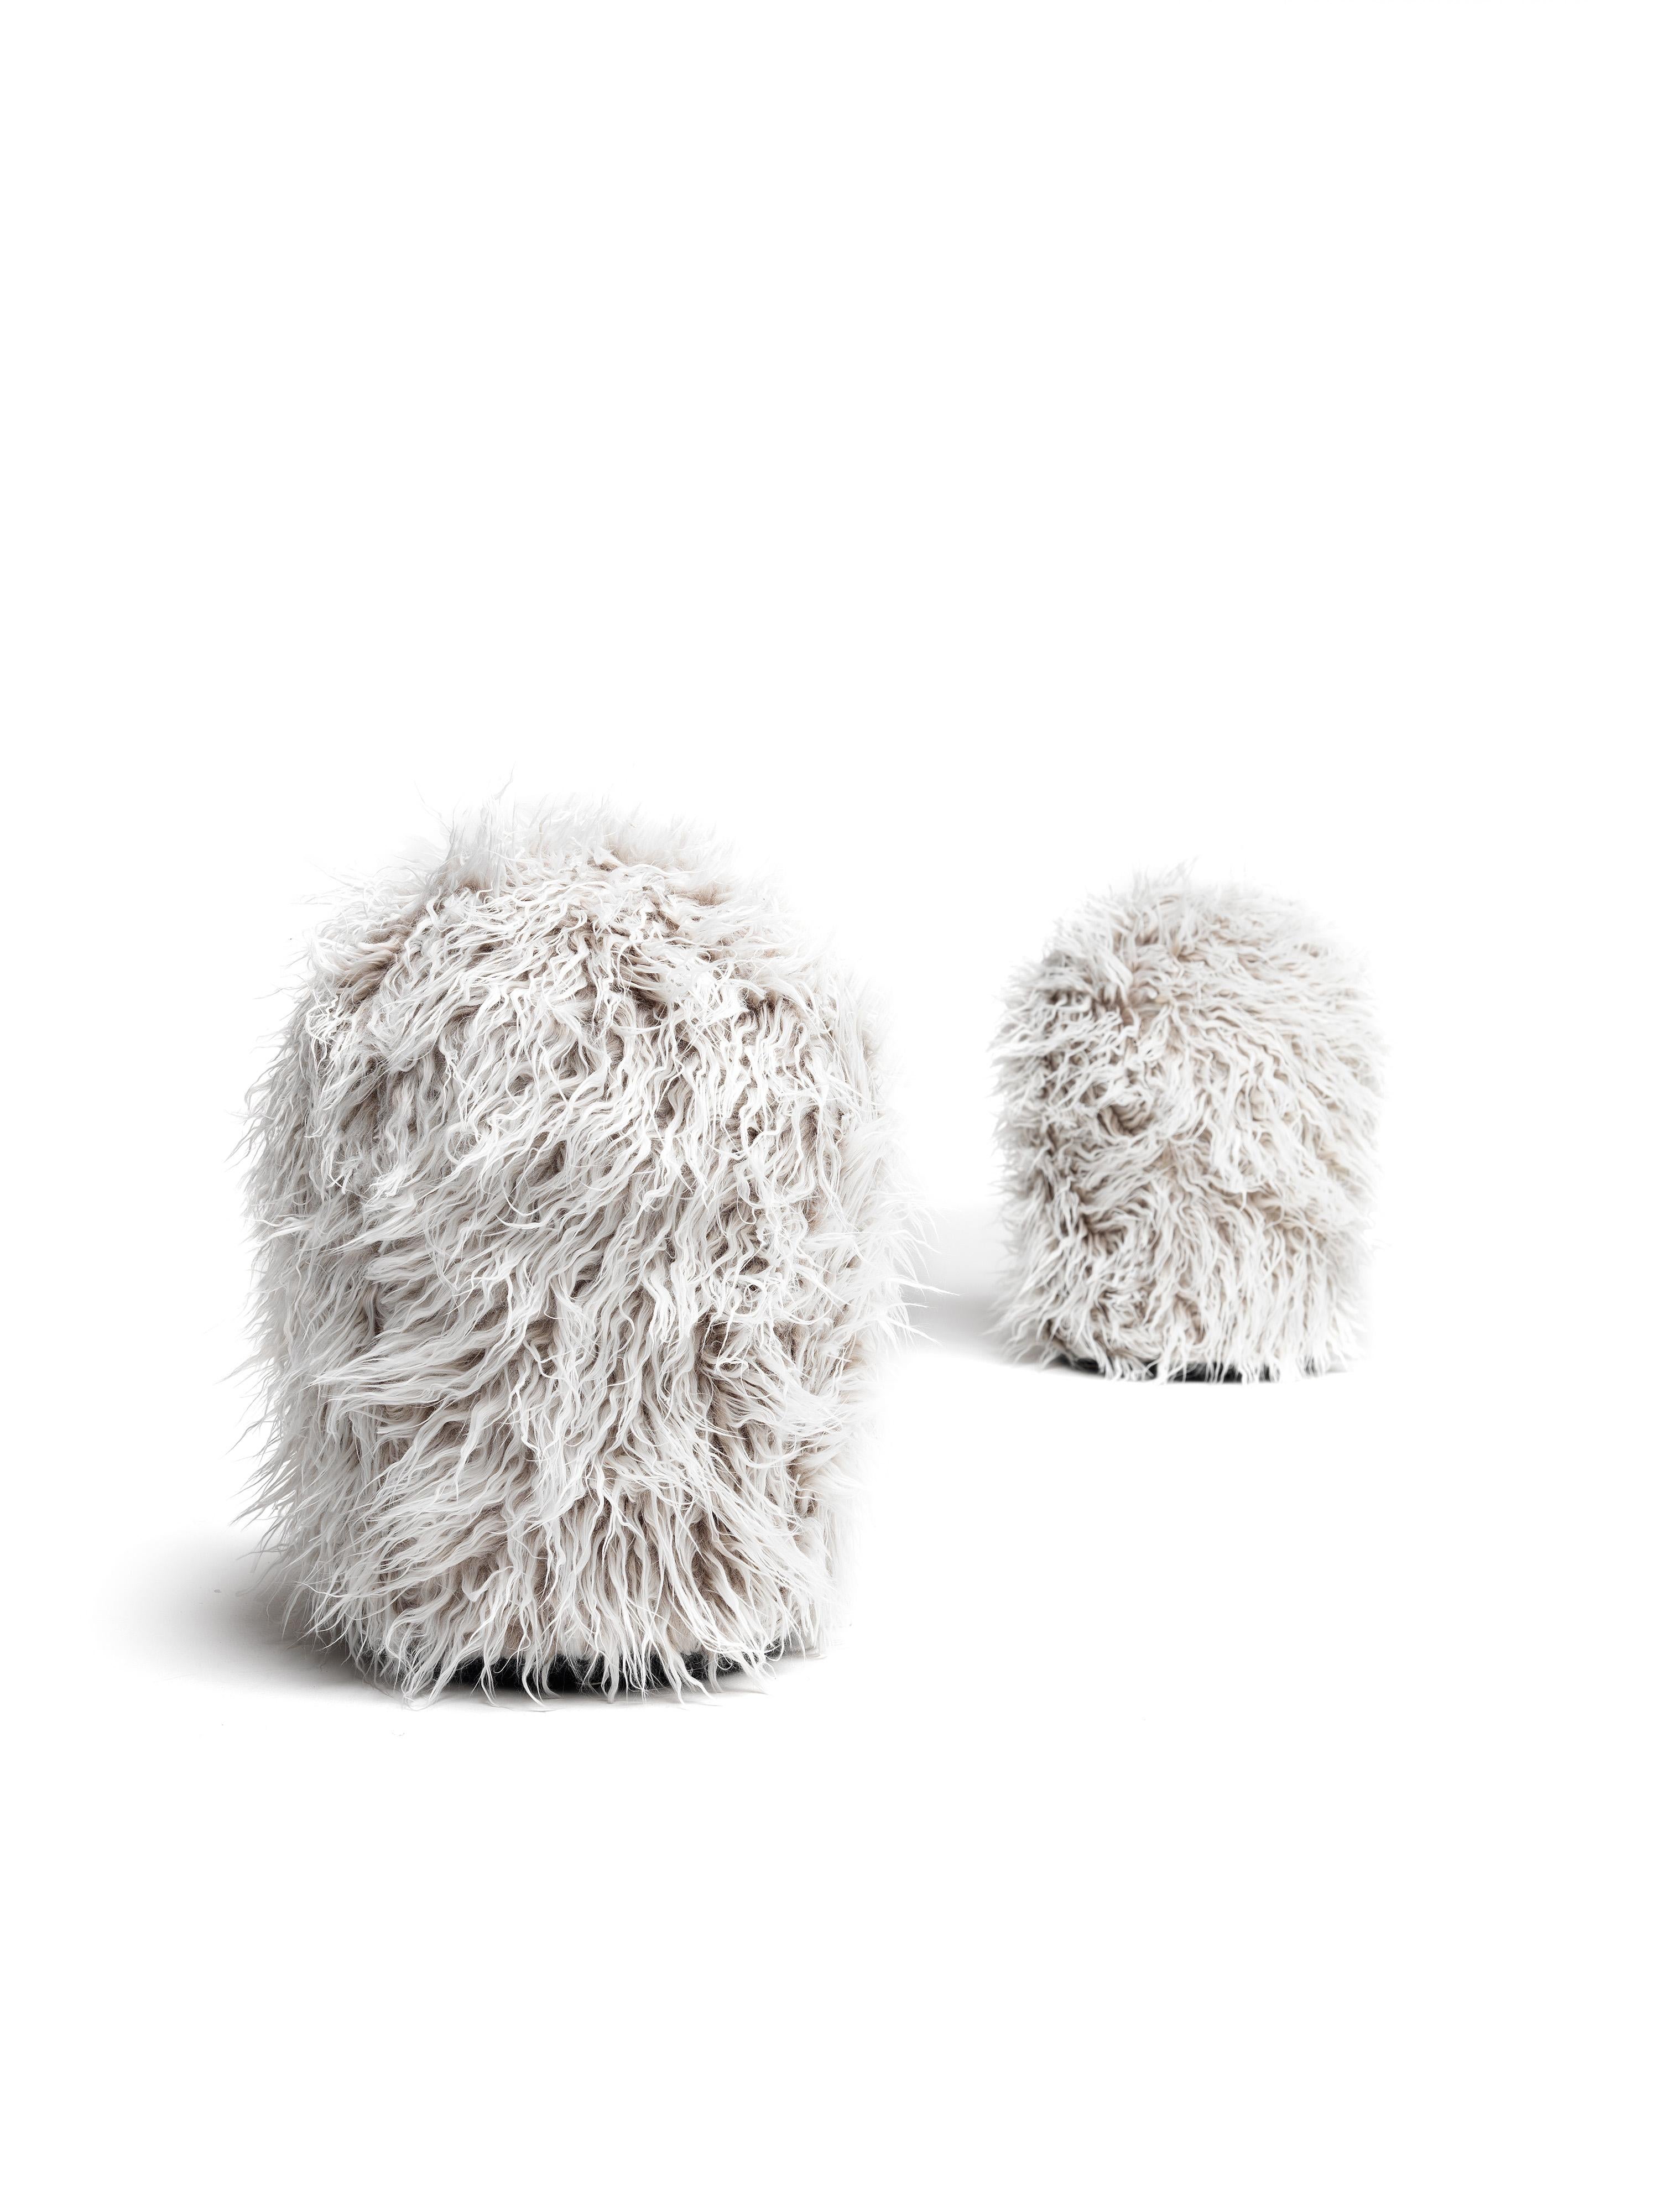 Soft, friendly, carefree…dishevelled! Chummy frizzy pouf is padded in polyurethane foam and coated in a long and “dishevelled” white faux fur. A pouf that, according to a concept that is particularly dear to the two designers who created them,